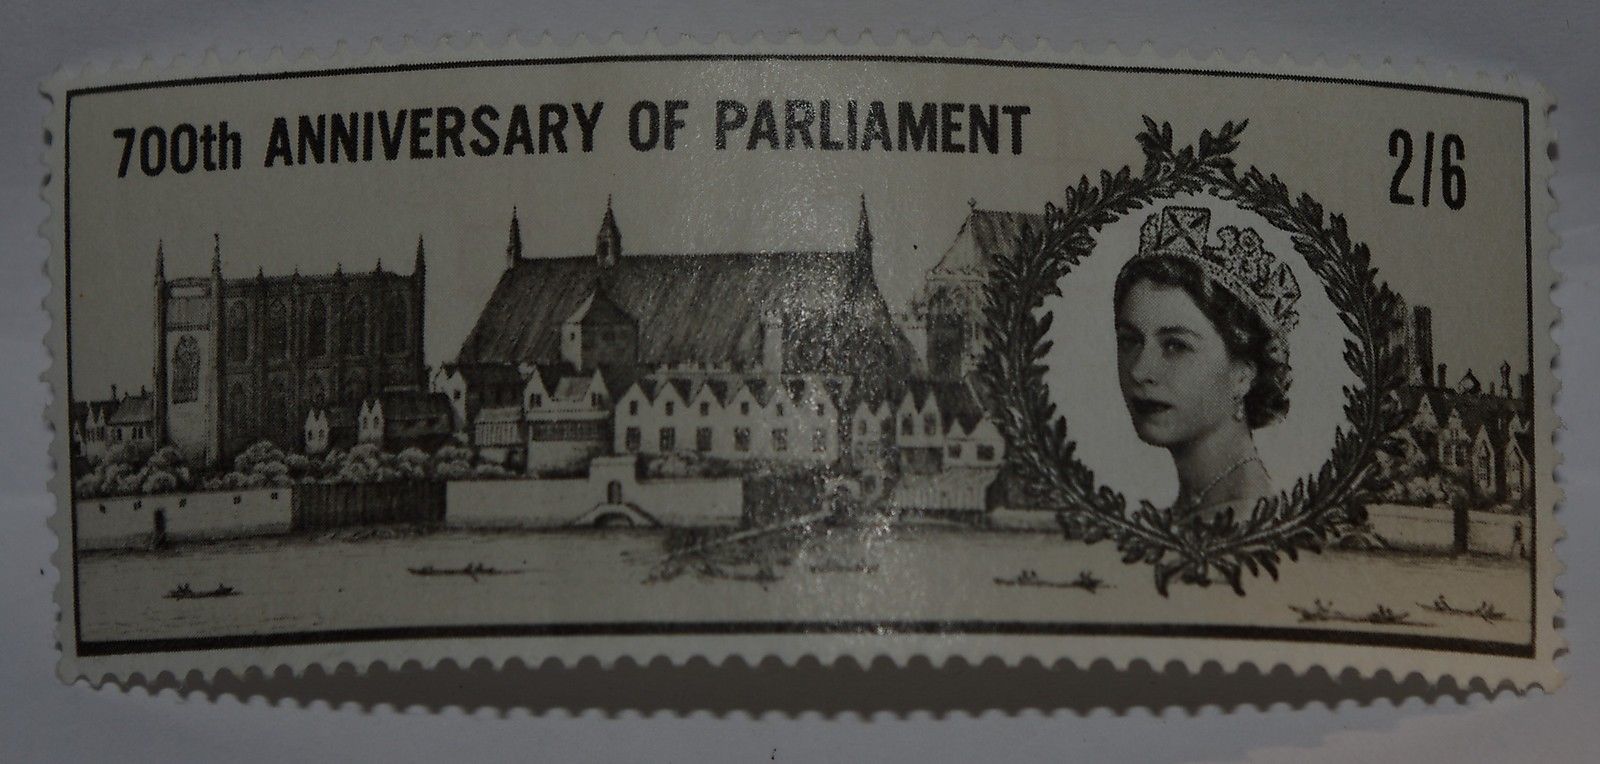 Primary image for VINTAGE STAMPS BRITISH 2'6 SHILLING PENCE PARLIAMENT GREAT BRITAIN UK GB X1 B8